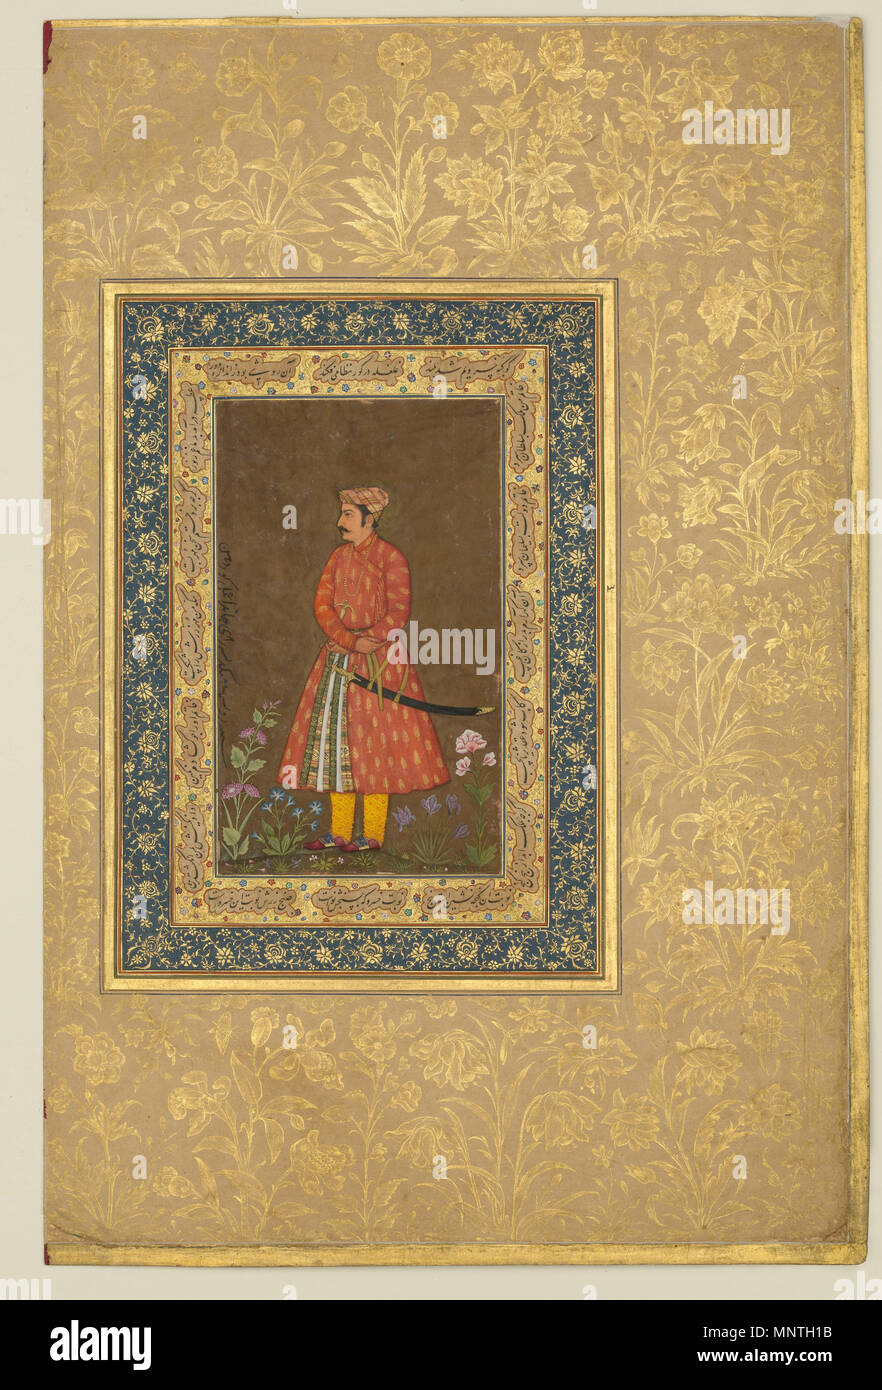 . 'Portrait of Rup Singh', Folio from the Shah Jahan Album Painting by Govardhan (active ca. 1596–1645) Calligrapher:   Sultan 'Ali al-Mashhadi (active late 15th–early 16th century) Object Name:   Album leaf Reign:   Jahangir (1605–27), verso Date:   verso: ca. 1615–20; recto: ca. 1500 Geography:   India Medium:   Ink, opaque watercolor, and gold on paper Dimensions:   Page: H. 15 5/16 in. (38.9 cm) W. 10 1/8 in. (25.7 cm) Painting with border: H. 8 13/16 in. (22.4 cm) W. 6 5/16 in. (16 cm) Painting without border: H. 5 7/8 in. (14.9 cm) W. 3 1/2 in. (8.9 cm) Mat: H. 19 1/4 in. (48.9 cm) W. 14 Stock Photo